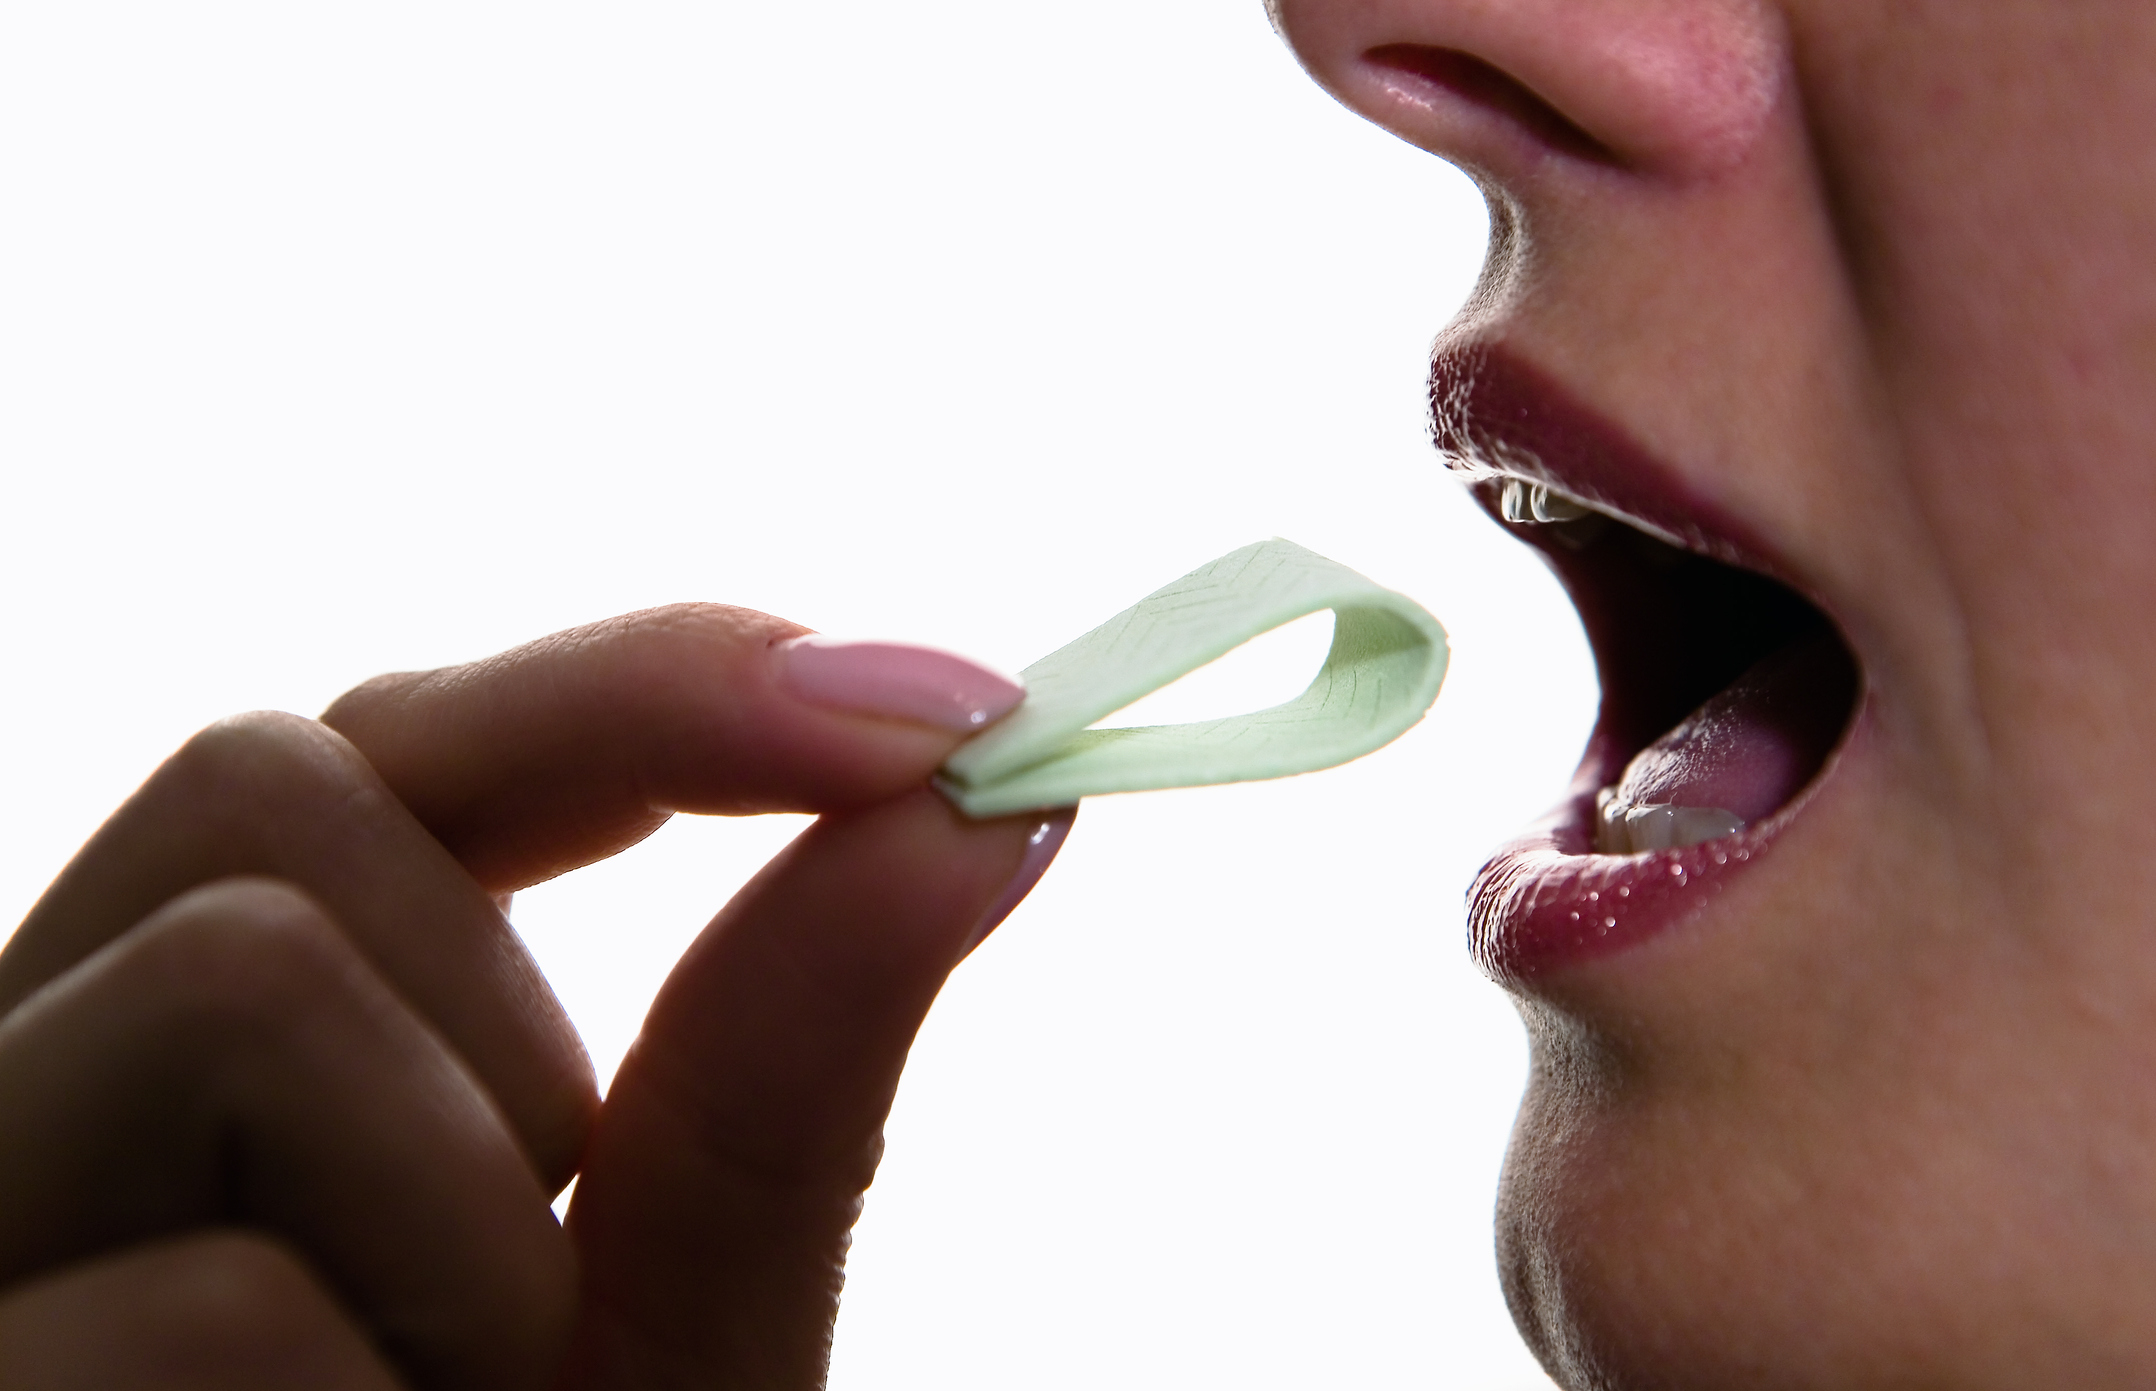 5 serious health risks from chewing gum